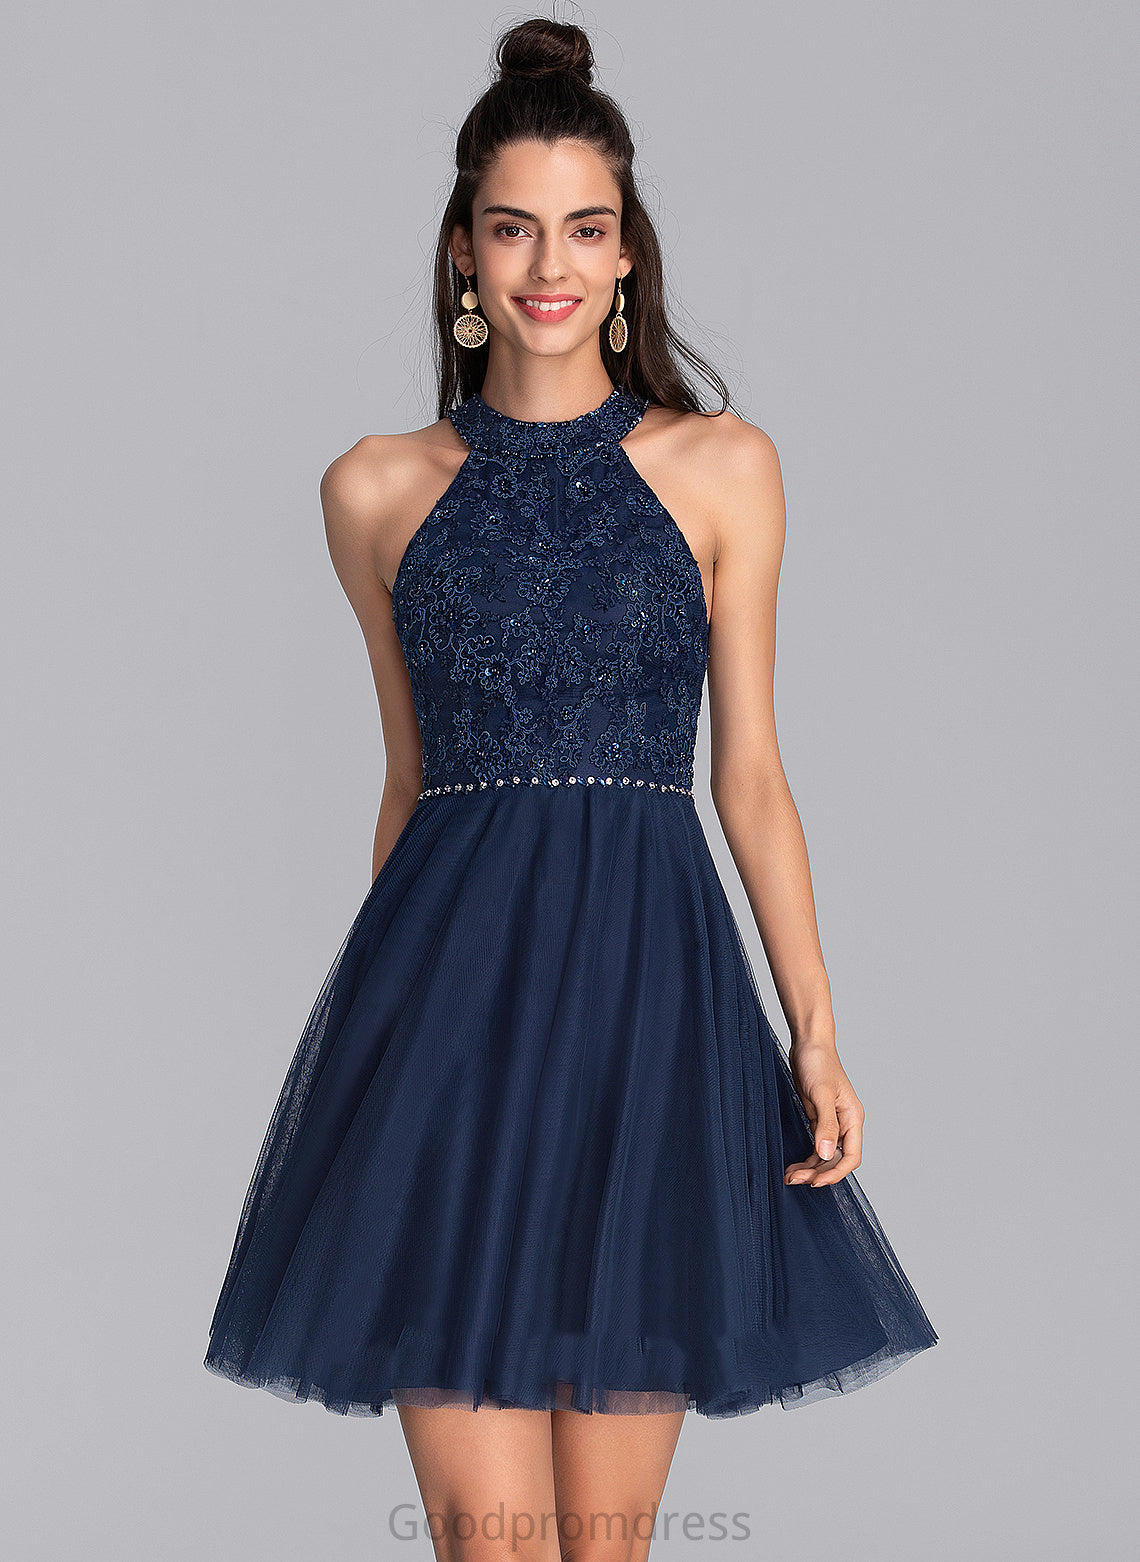 Short/Mini A-Line Dress Tulle Shaylee With Homecoming Dresses Scoop Beading Neck Lace Homecoming